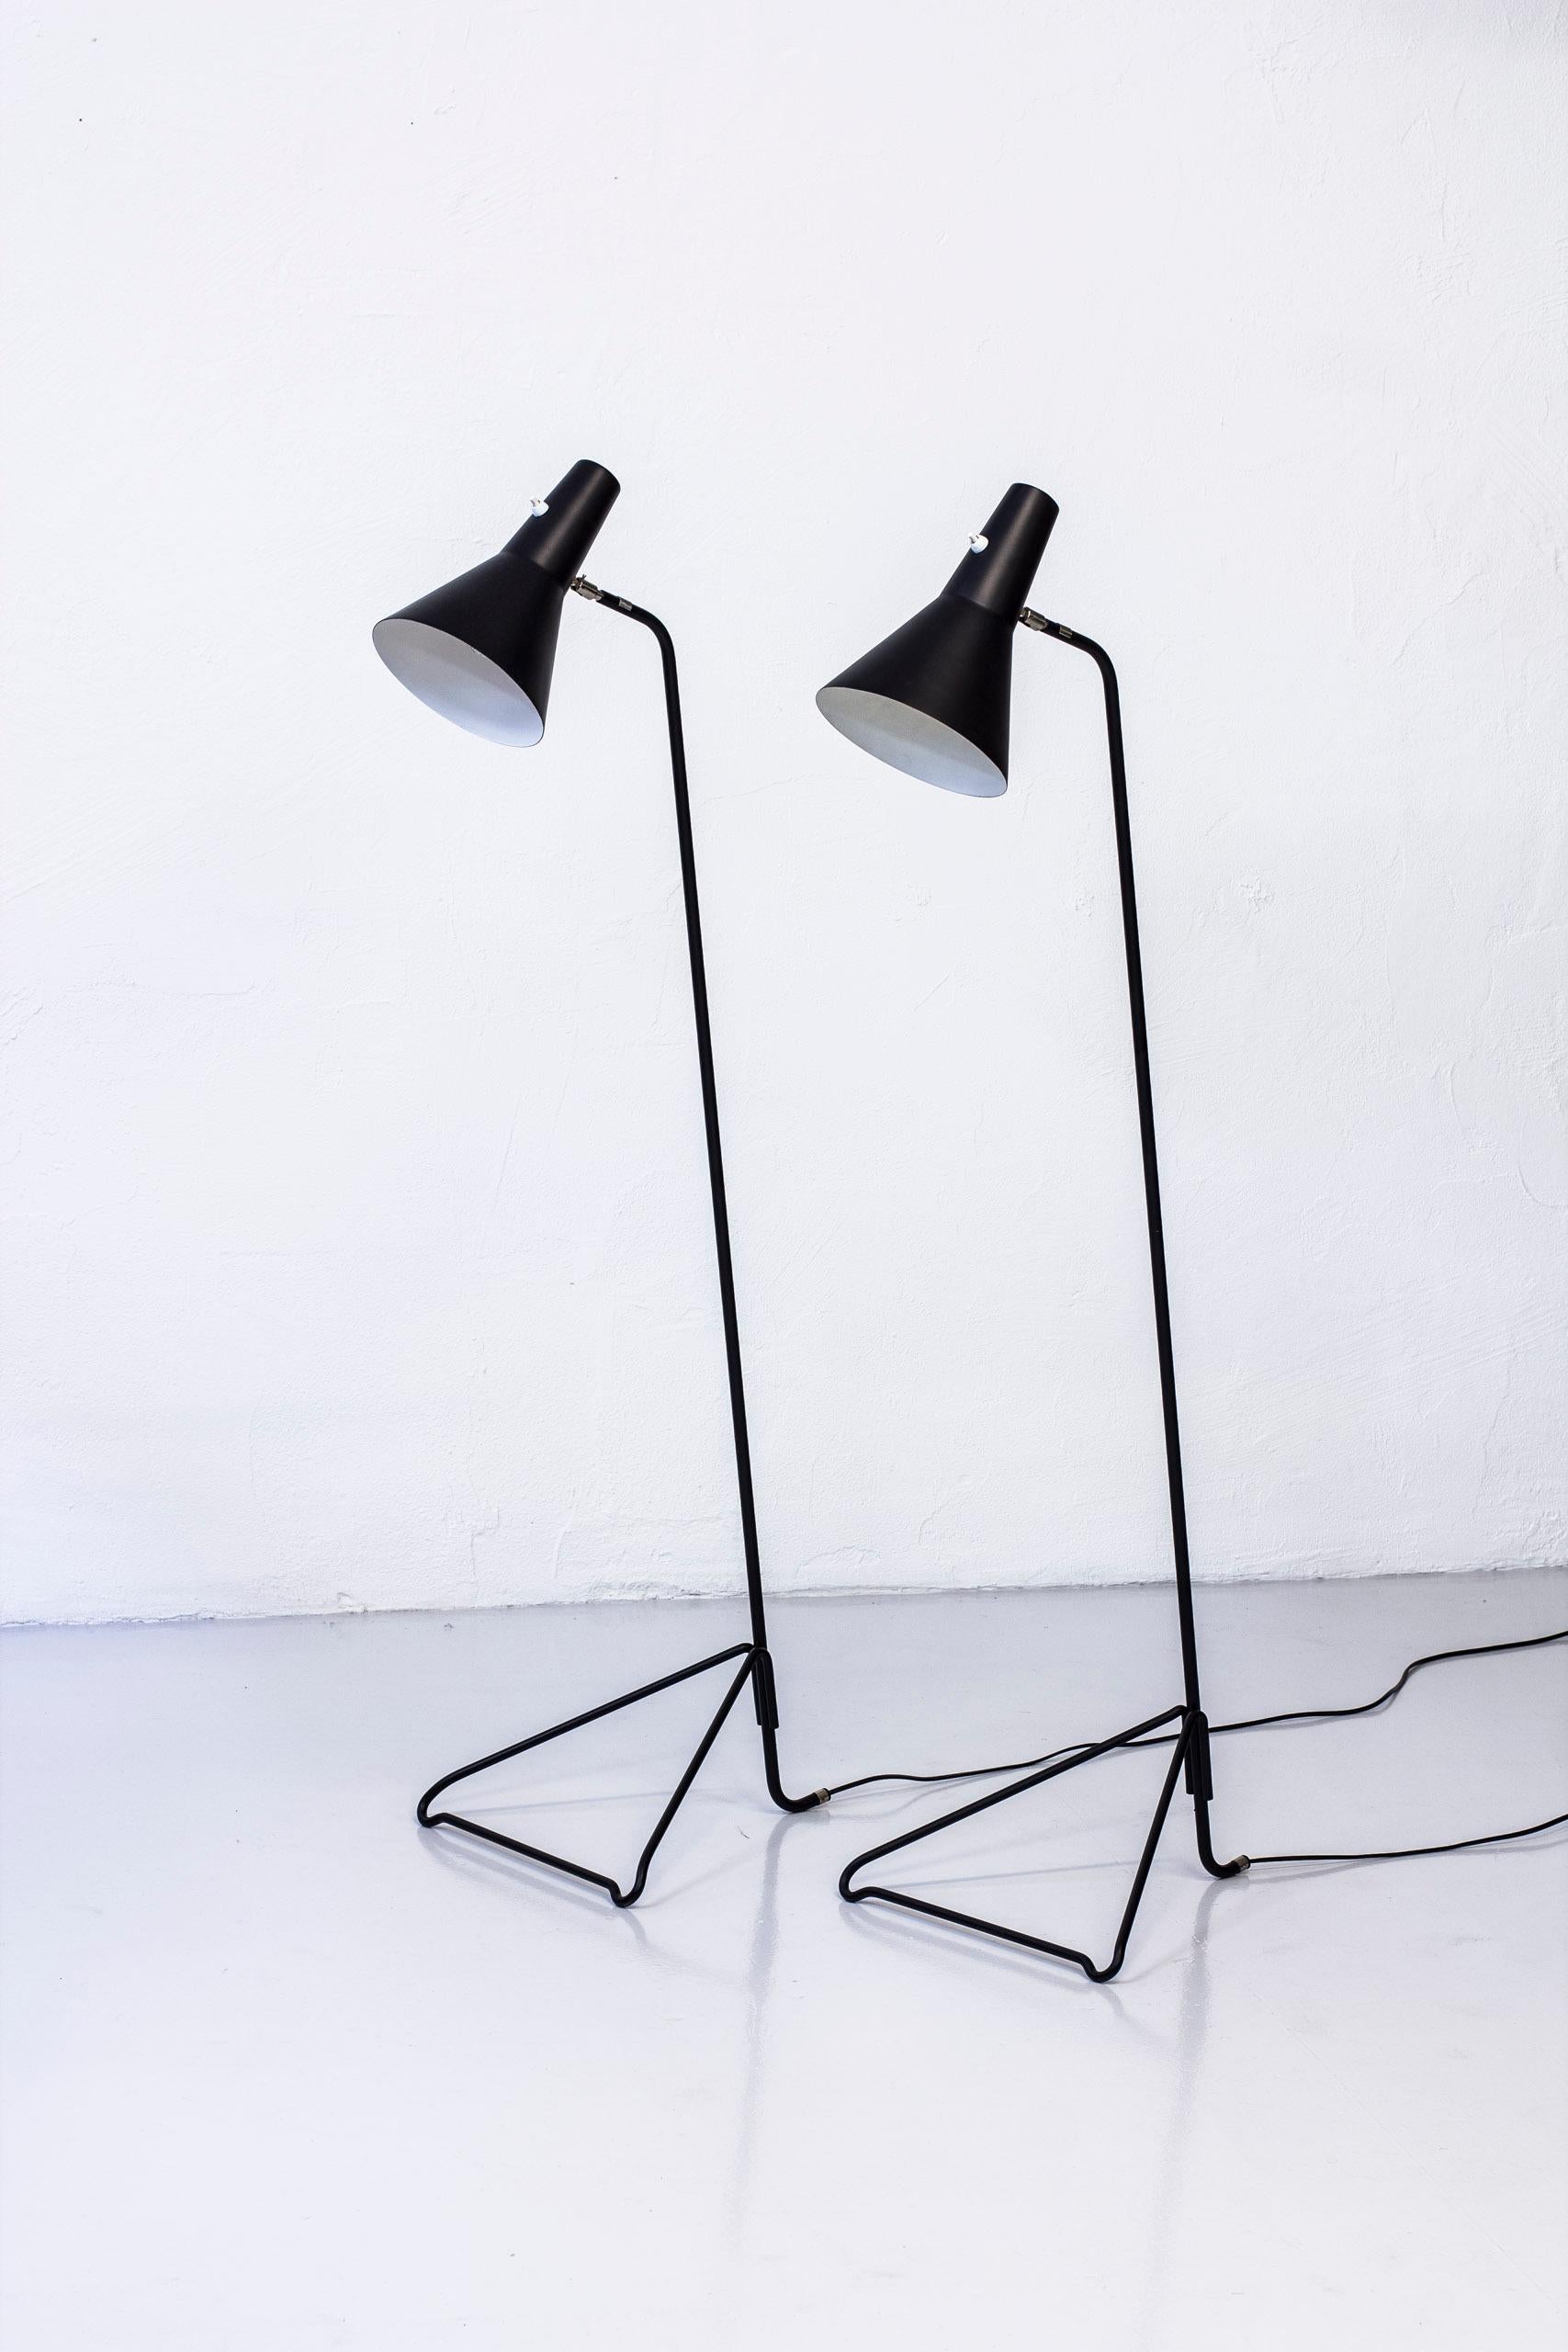 Floor lamp produced during the 1950s in Sweden by ASEA. Black lacquered metal base and shade with chromed details. Adjustable angle on the shade. Light switch on top of the lampshade in working condition. Signed with ASEA hallmark on the shade. Very